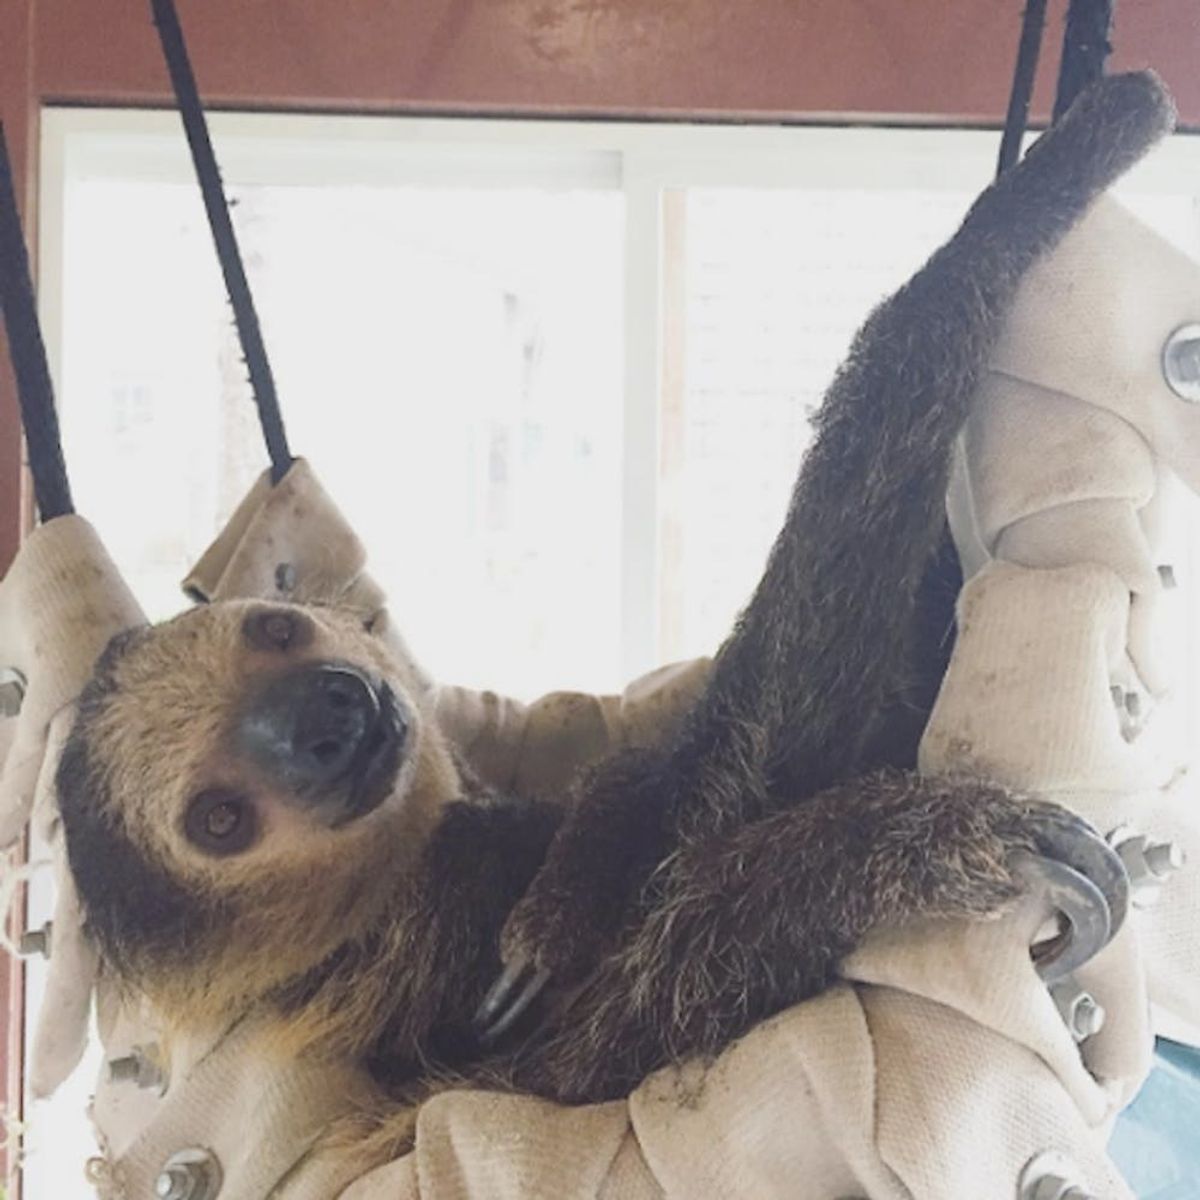 Here’s How You Can Nap With a Sloth (Yes, Really!)